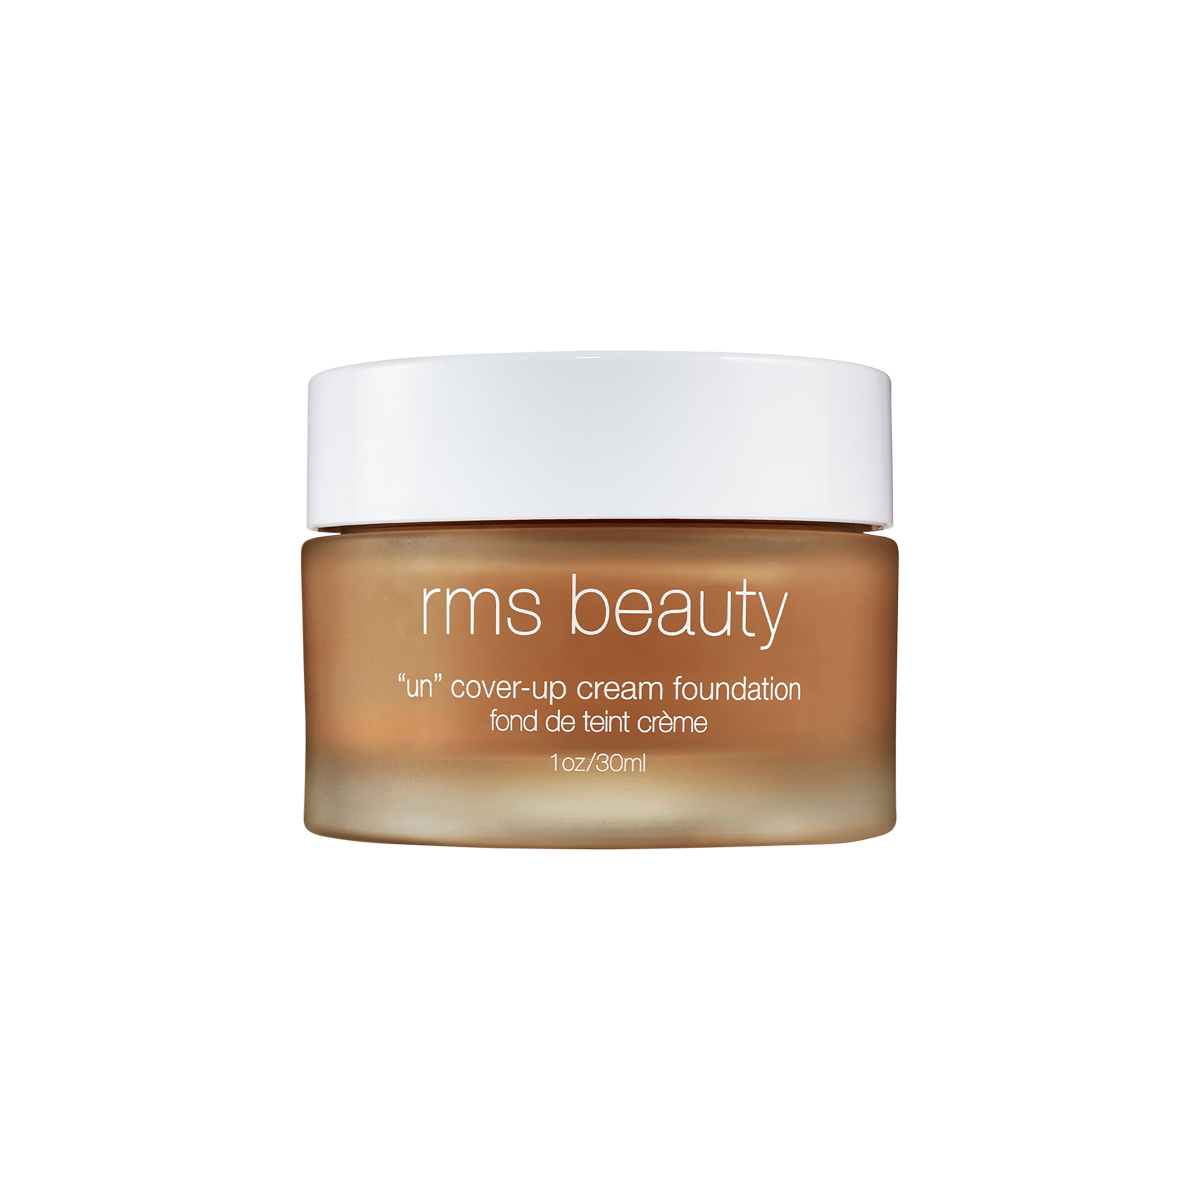 RMS Beauty - UnCoverup Cream Foundation